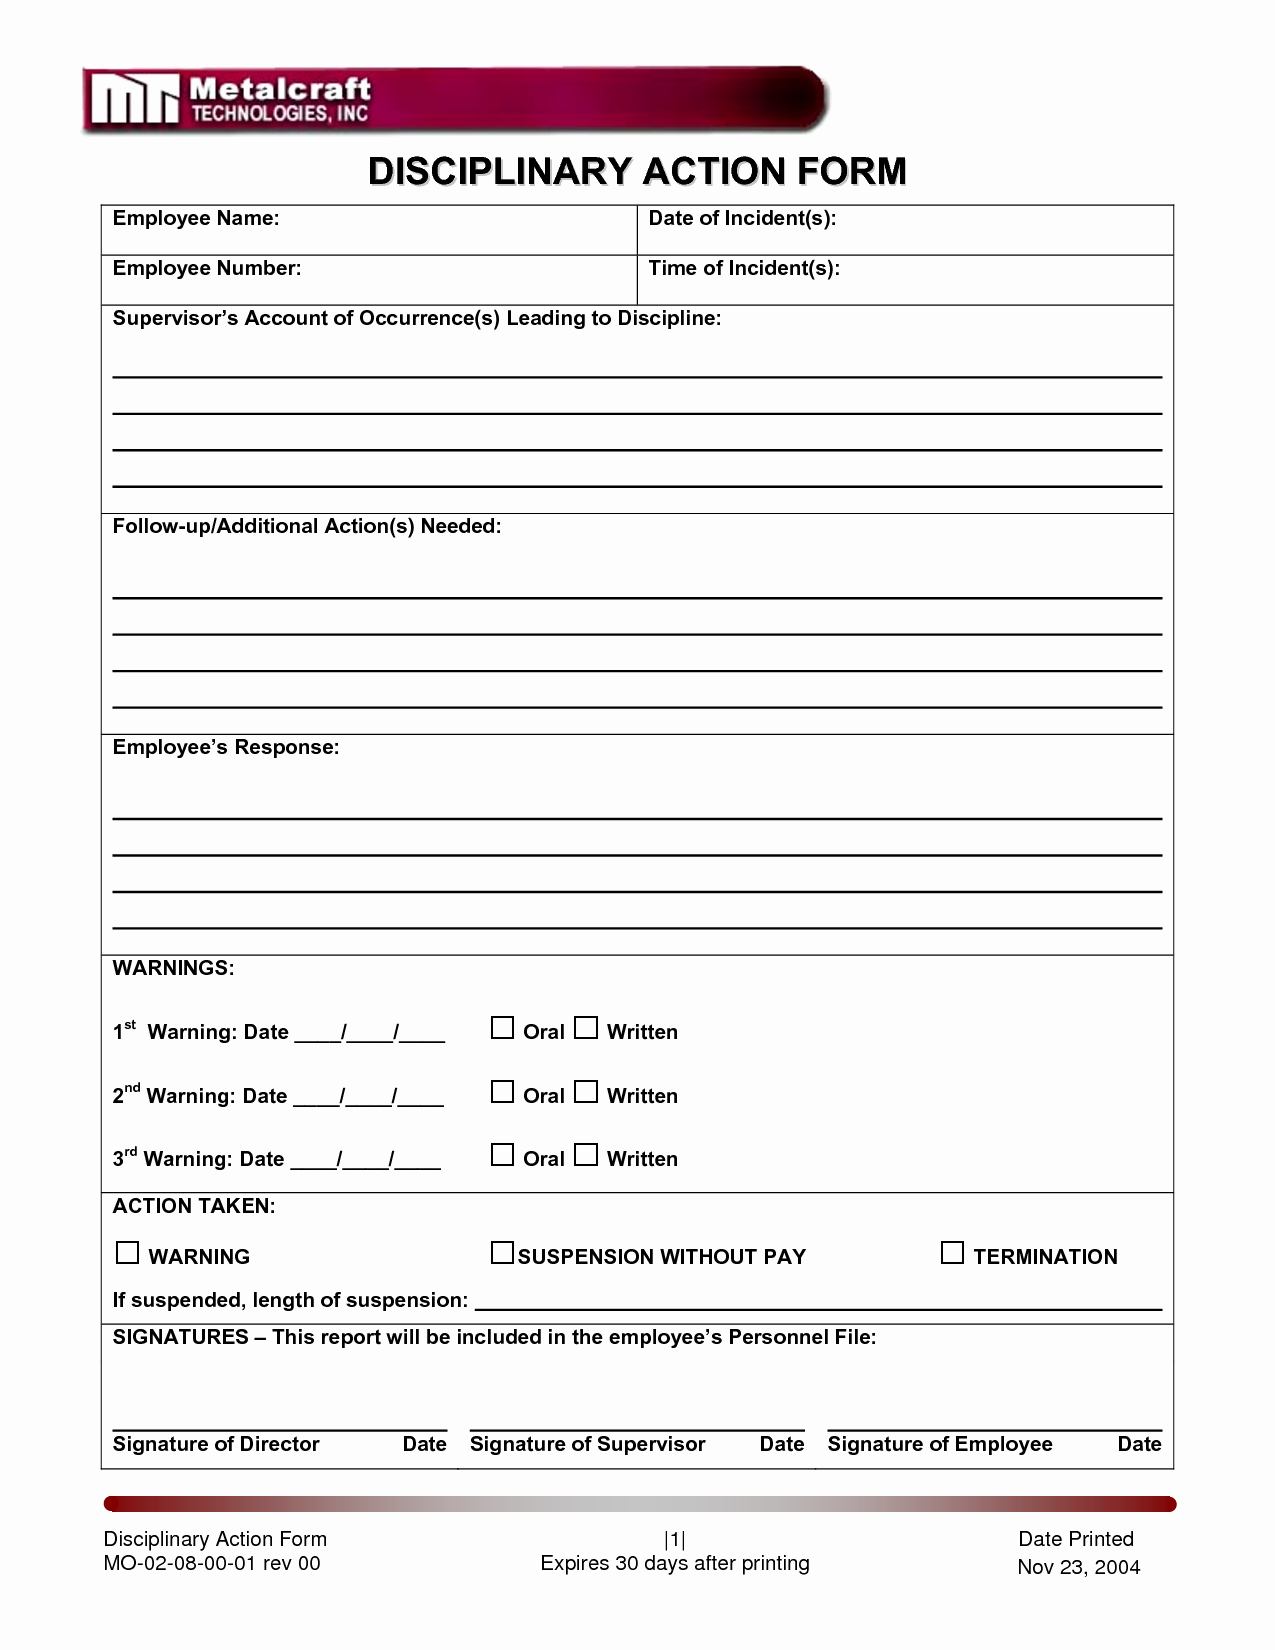 Free Printable Employee Disciplinary forms Unique Disciplinary Action form Employee forms